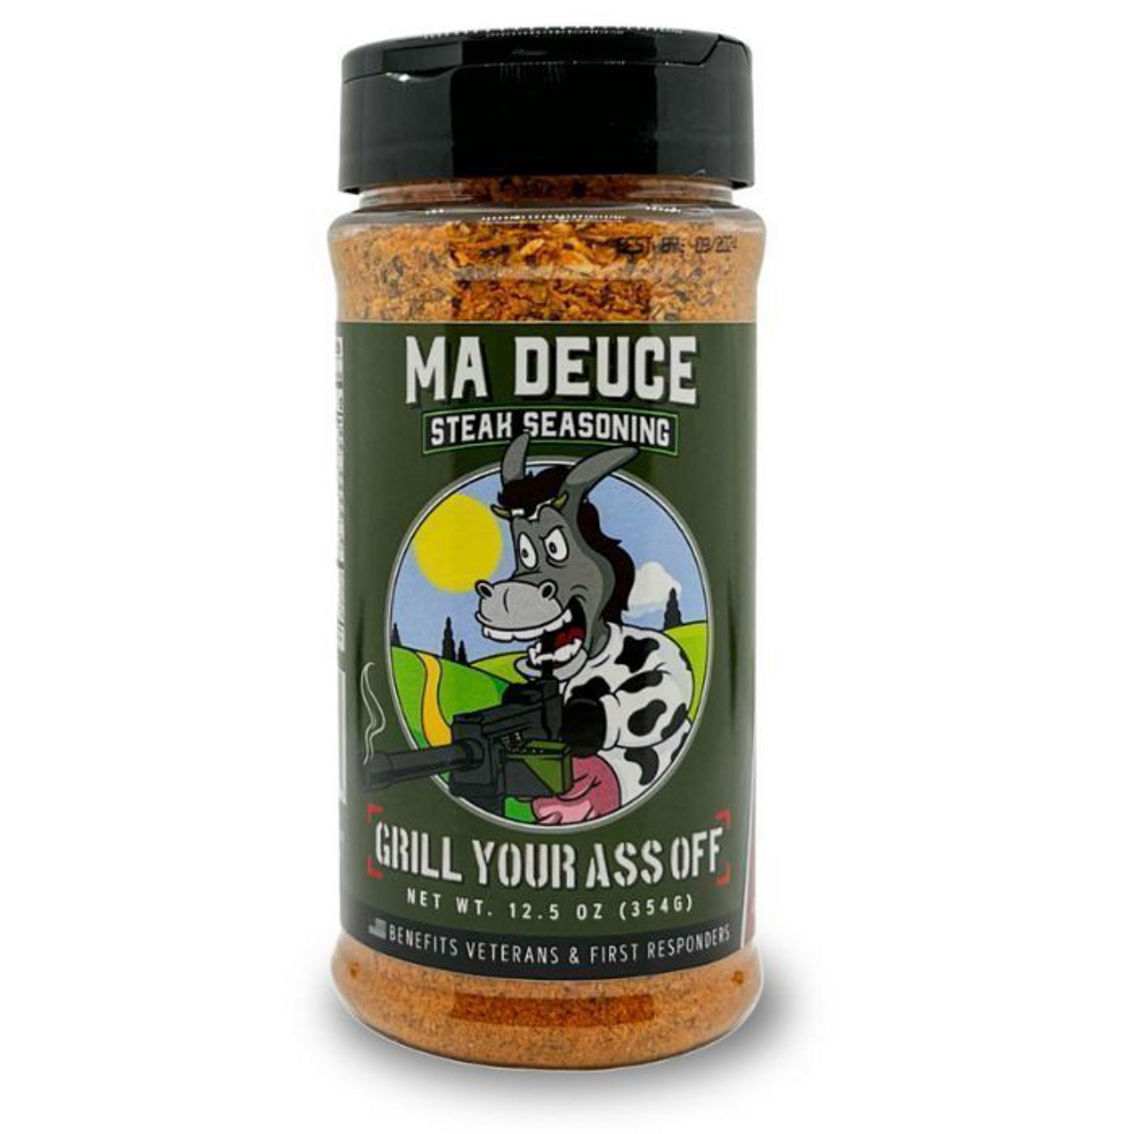 Grill Your A** Off Ma Deuce Steak Seasoning™ - Image 2 of 2